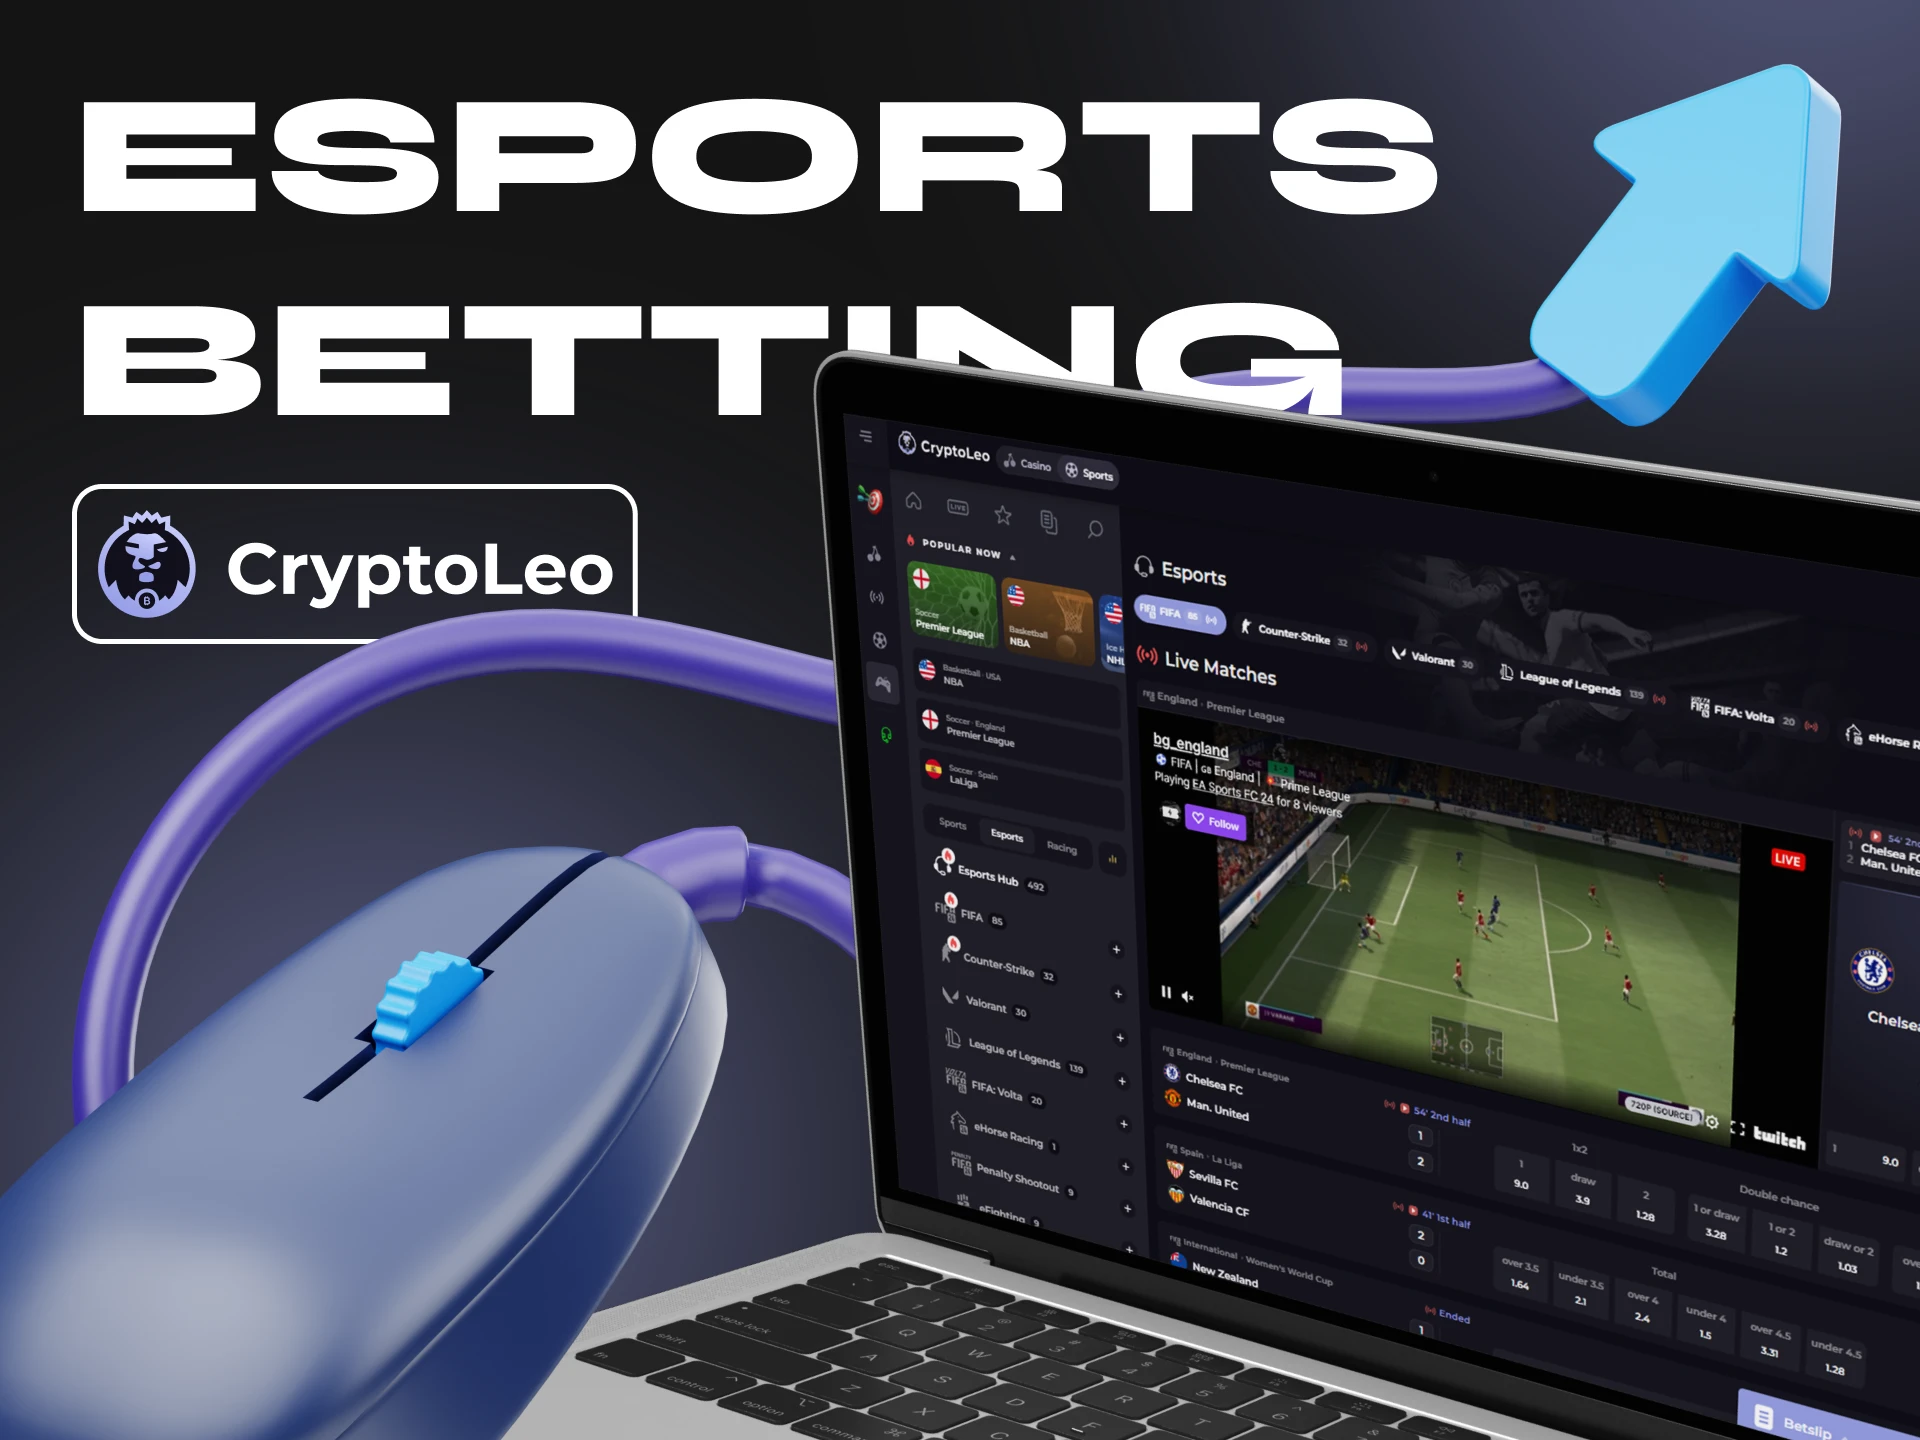 If you are a computer gaming enthusiast, try betting on eSports on Cryptoleo.